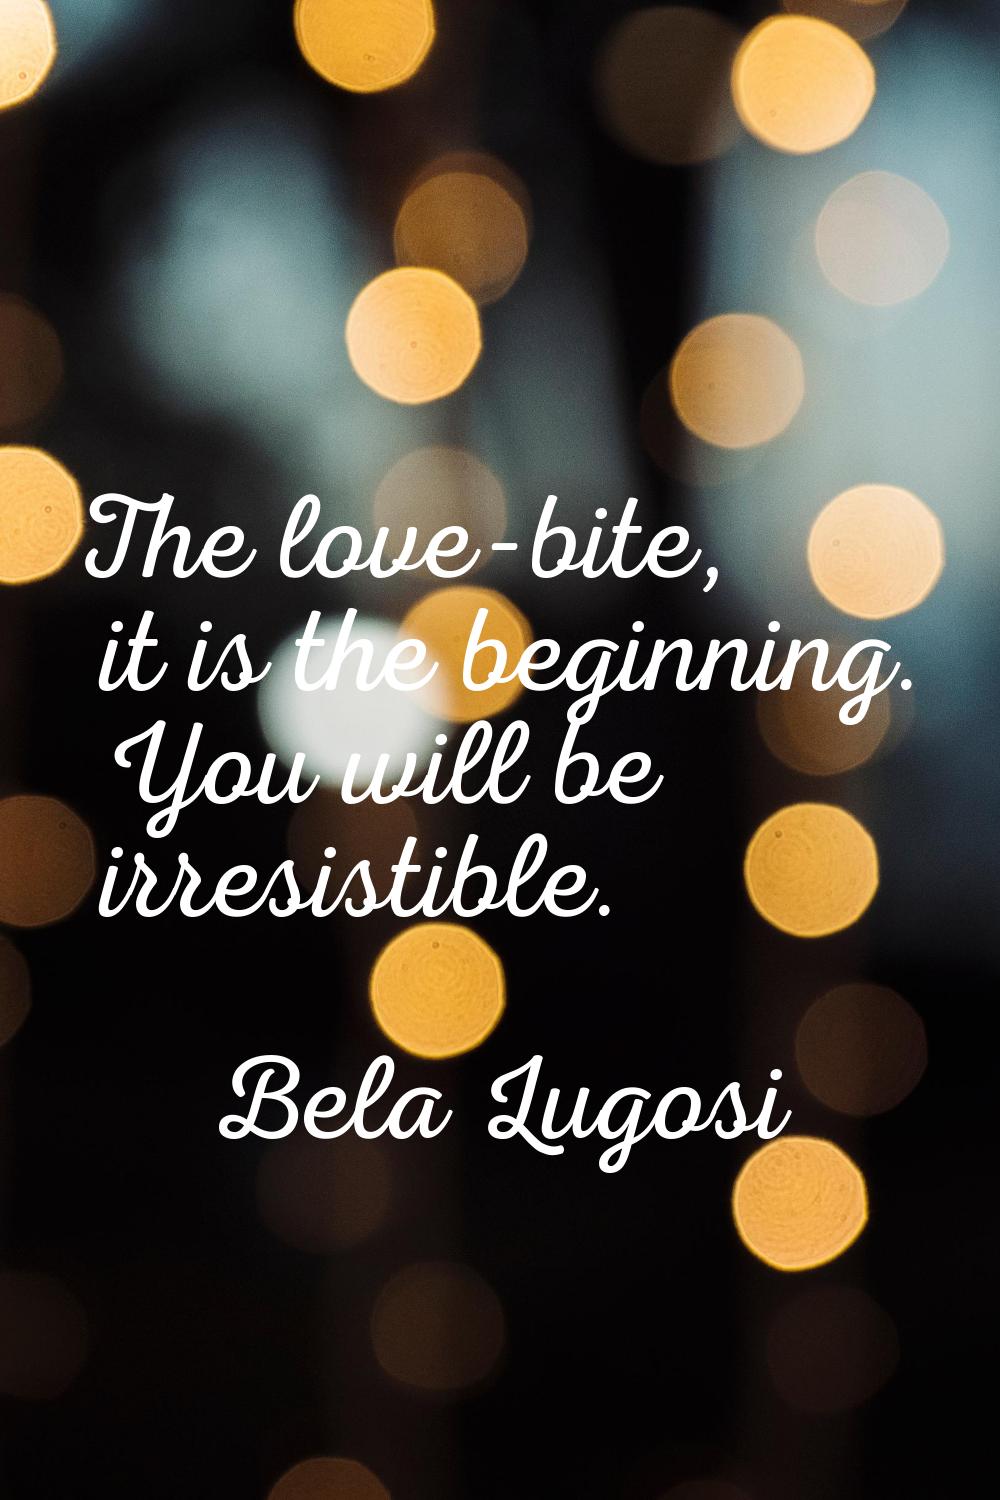 The love-bite, it is the beginning. You will be irresistible.